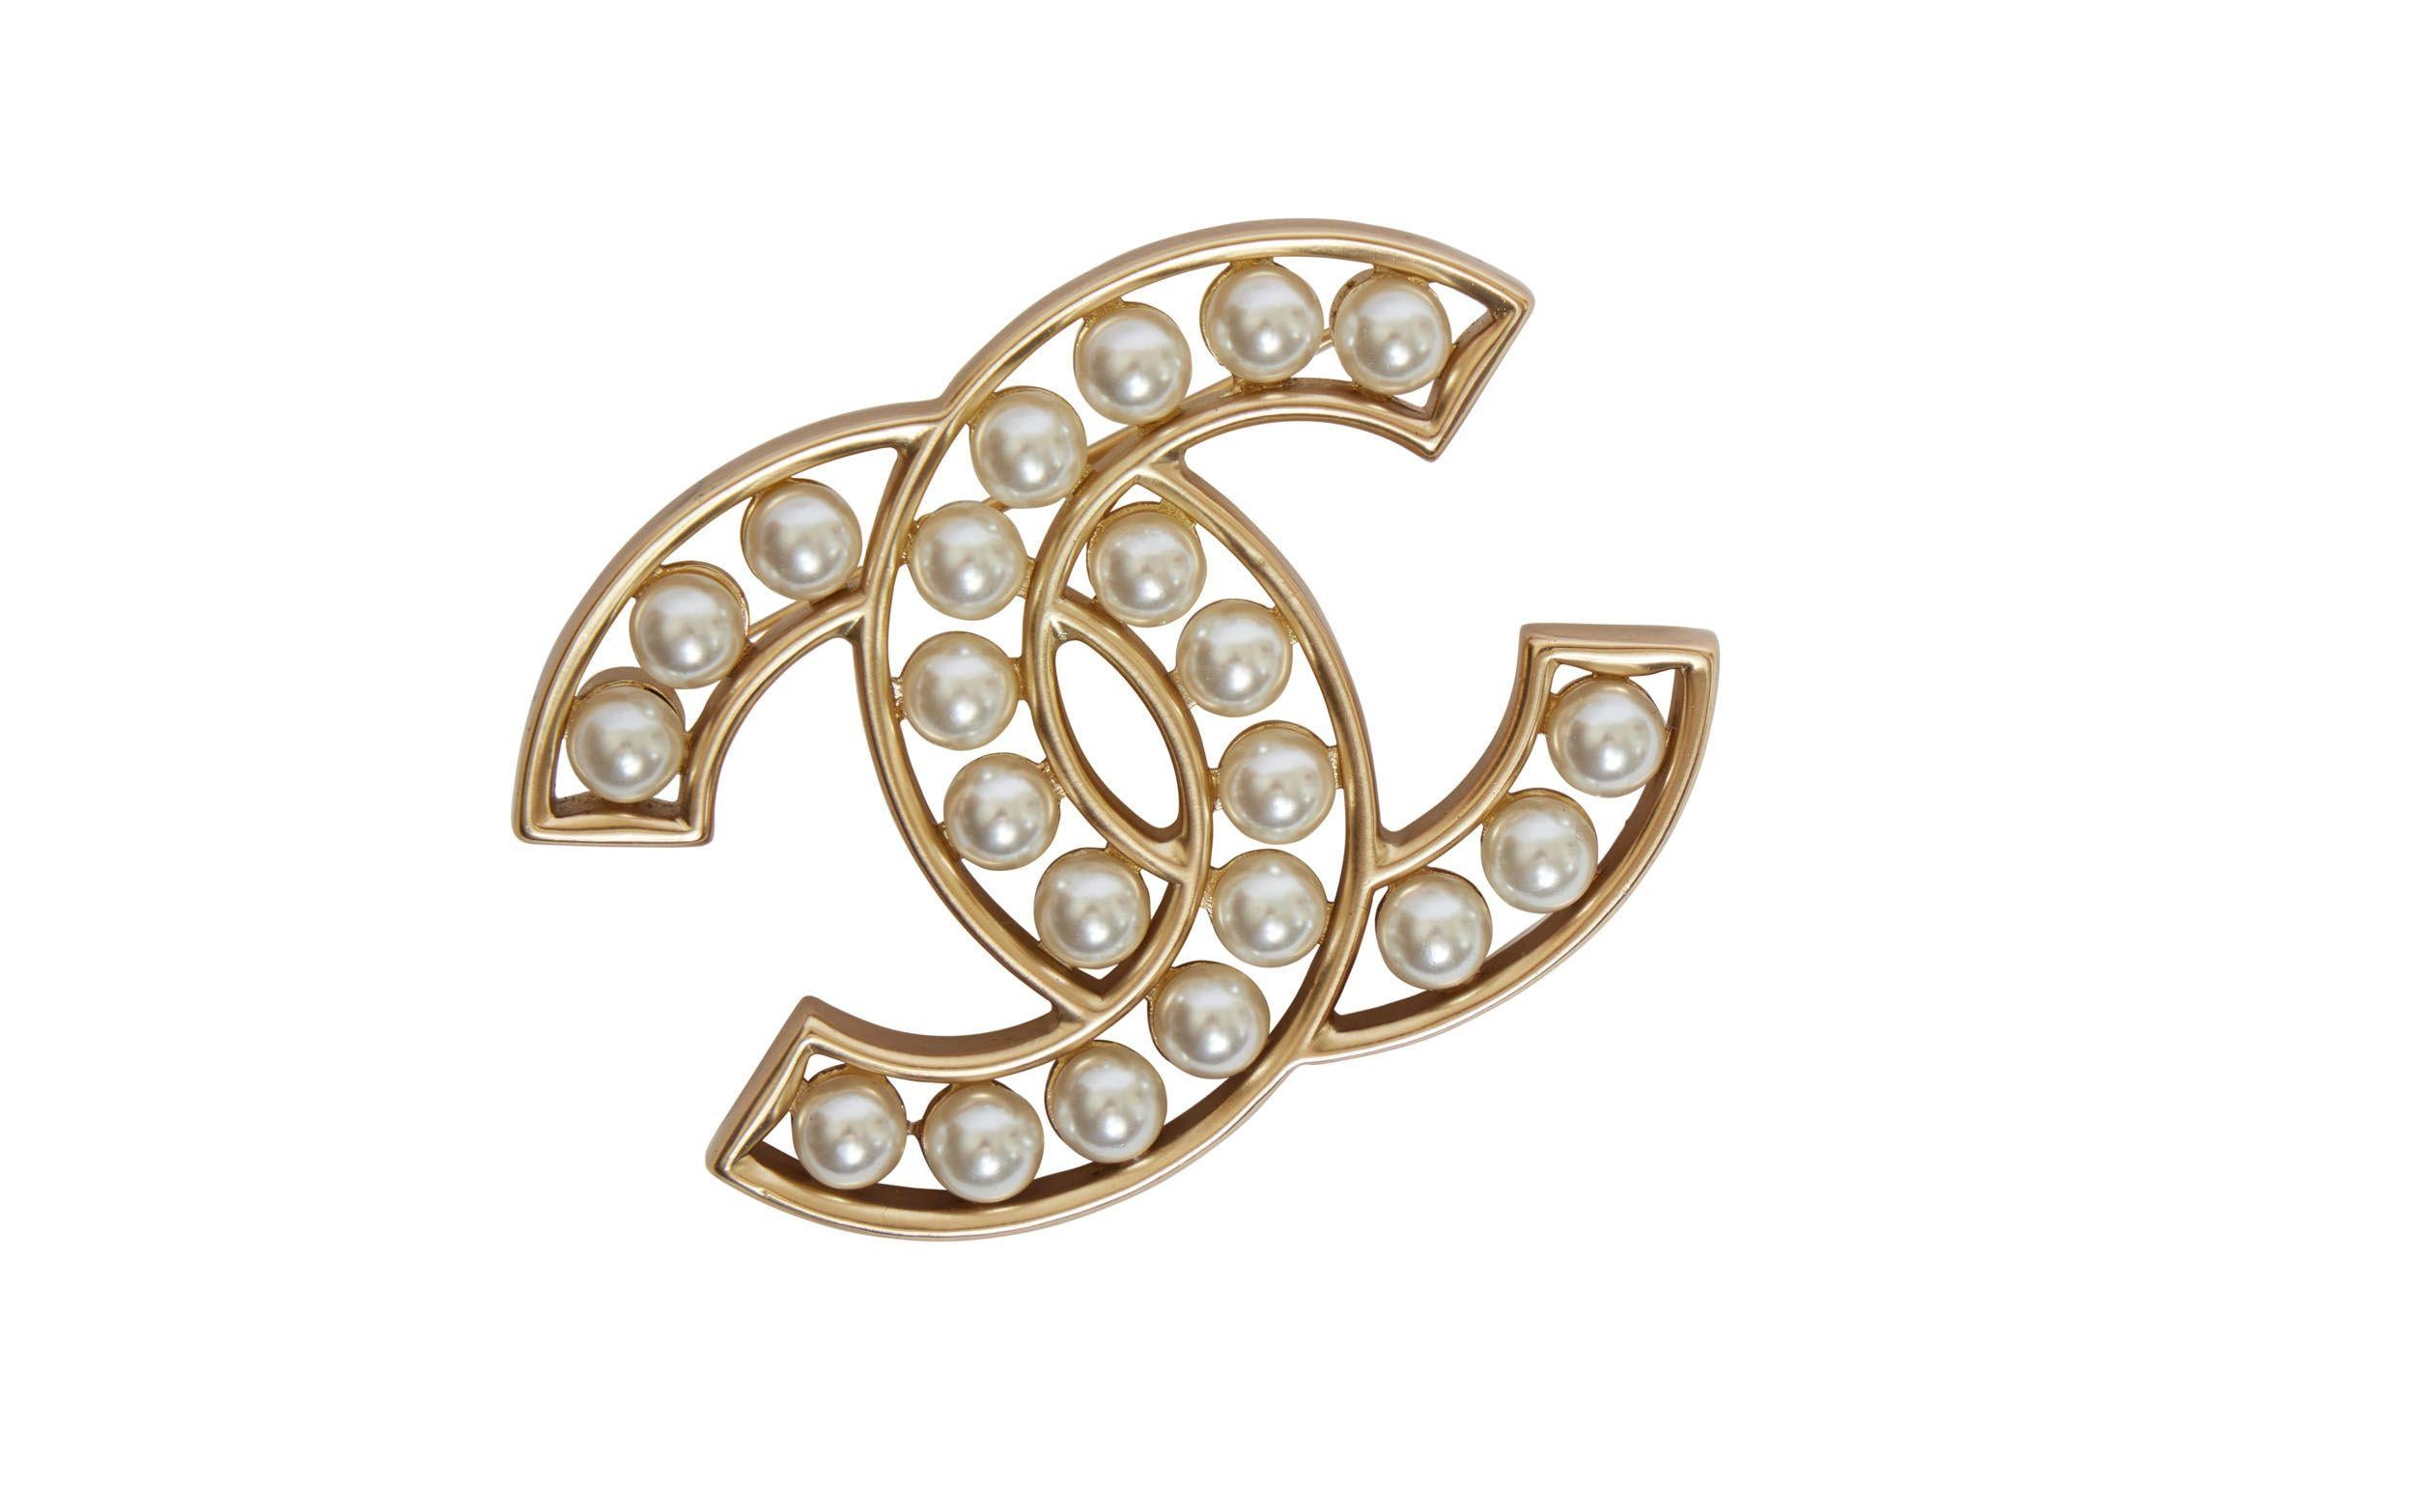 Golden Chanel CC logo pin with embedded pearls. On the back you can see a small plate with Chanel written on it. It is like new and goes perfectly with an everyday outfit as well as a night time outfit.
